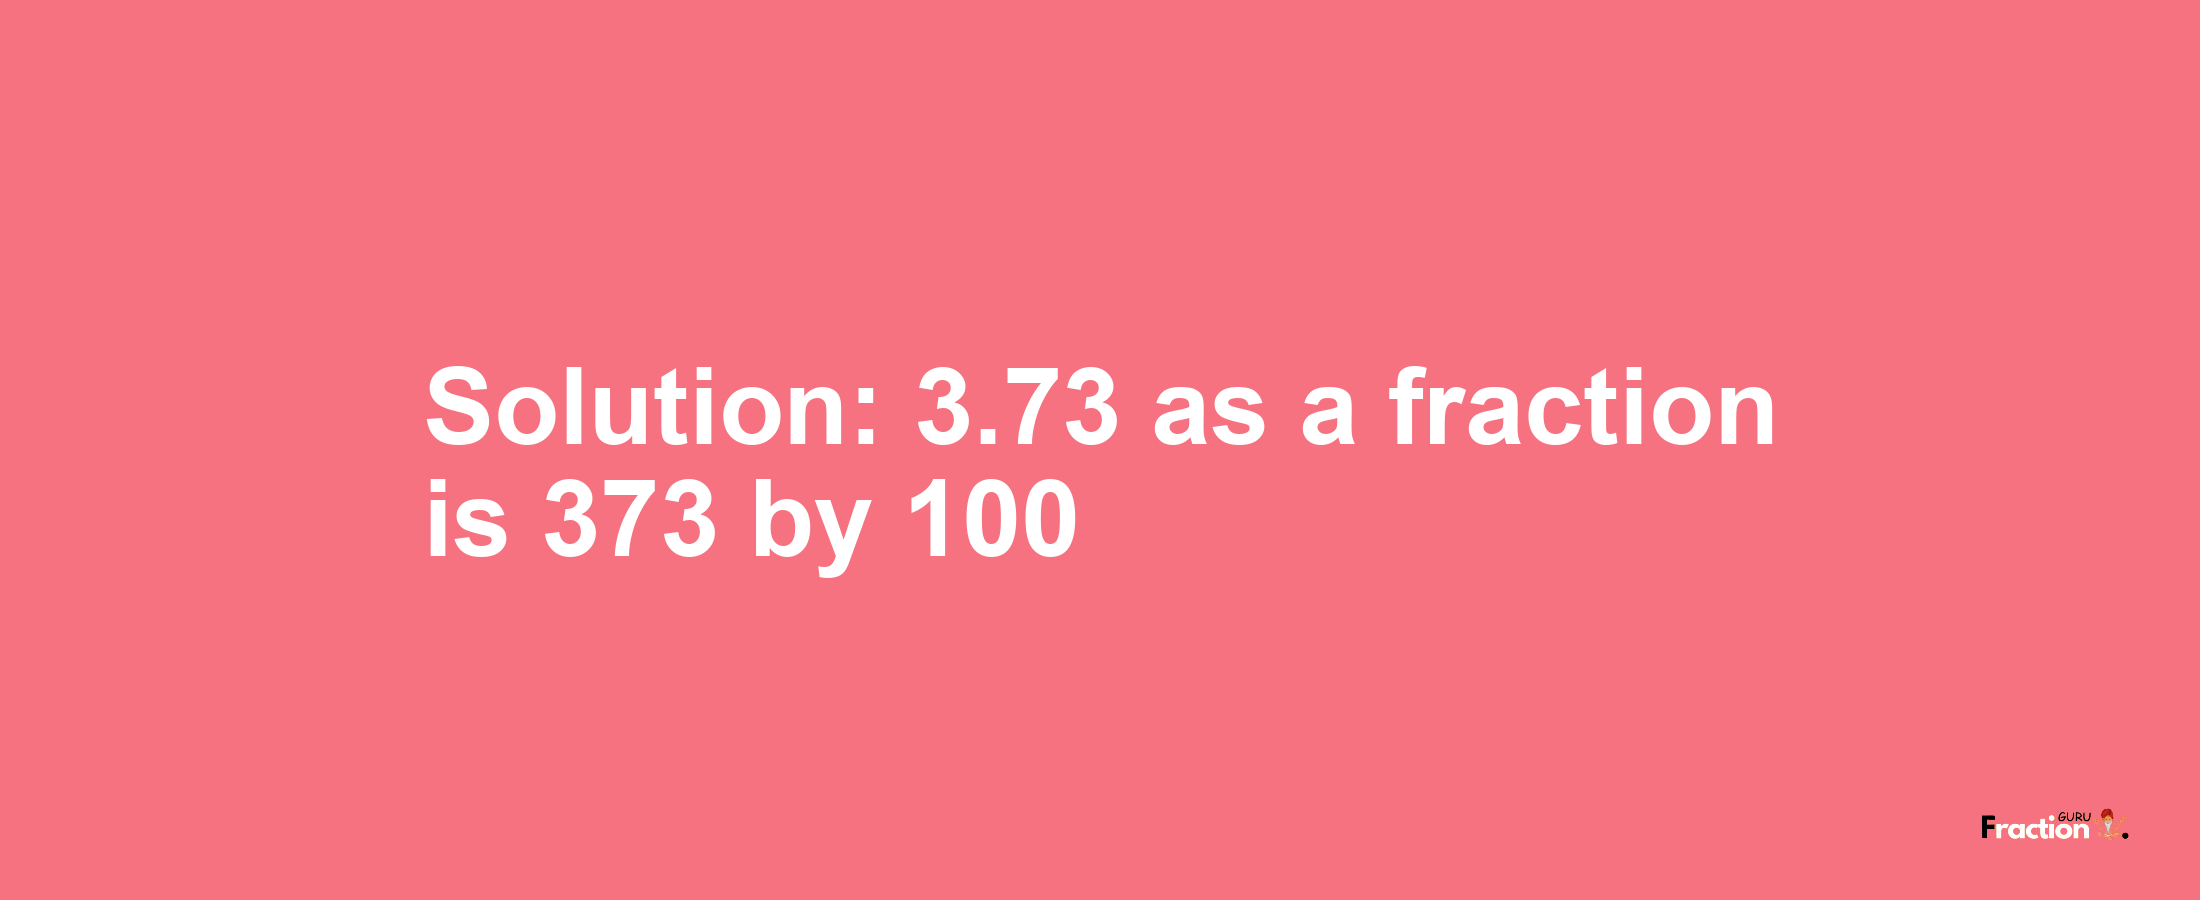 Solution:3.73 as a fraction is 373/100